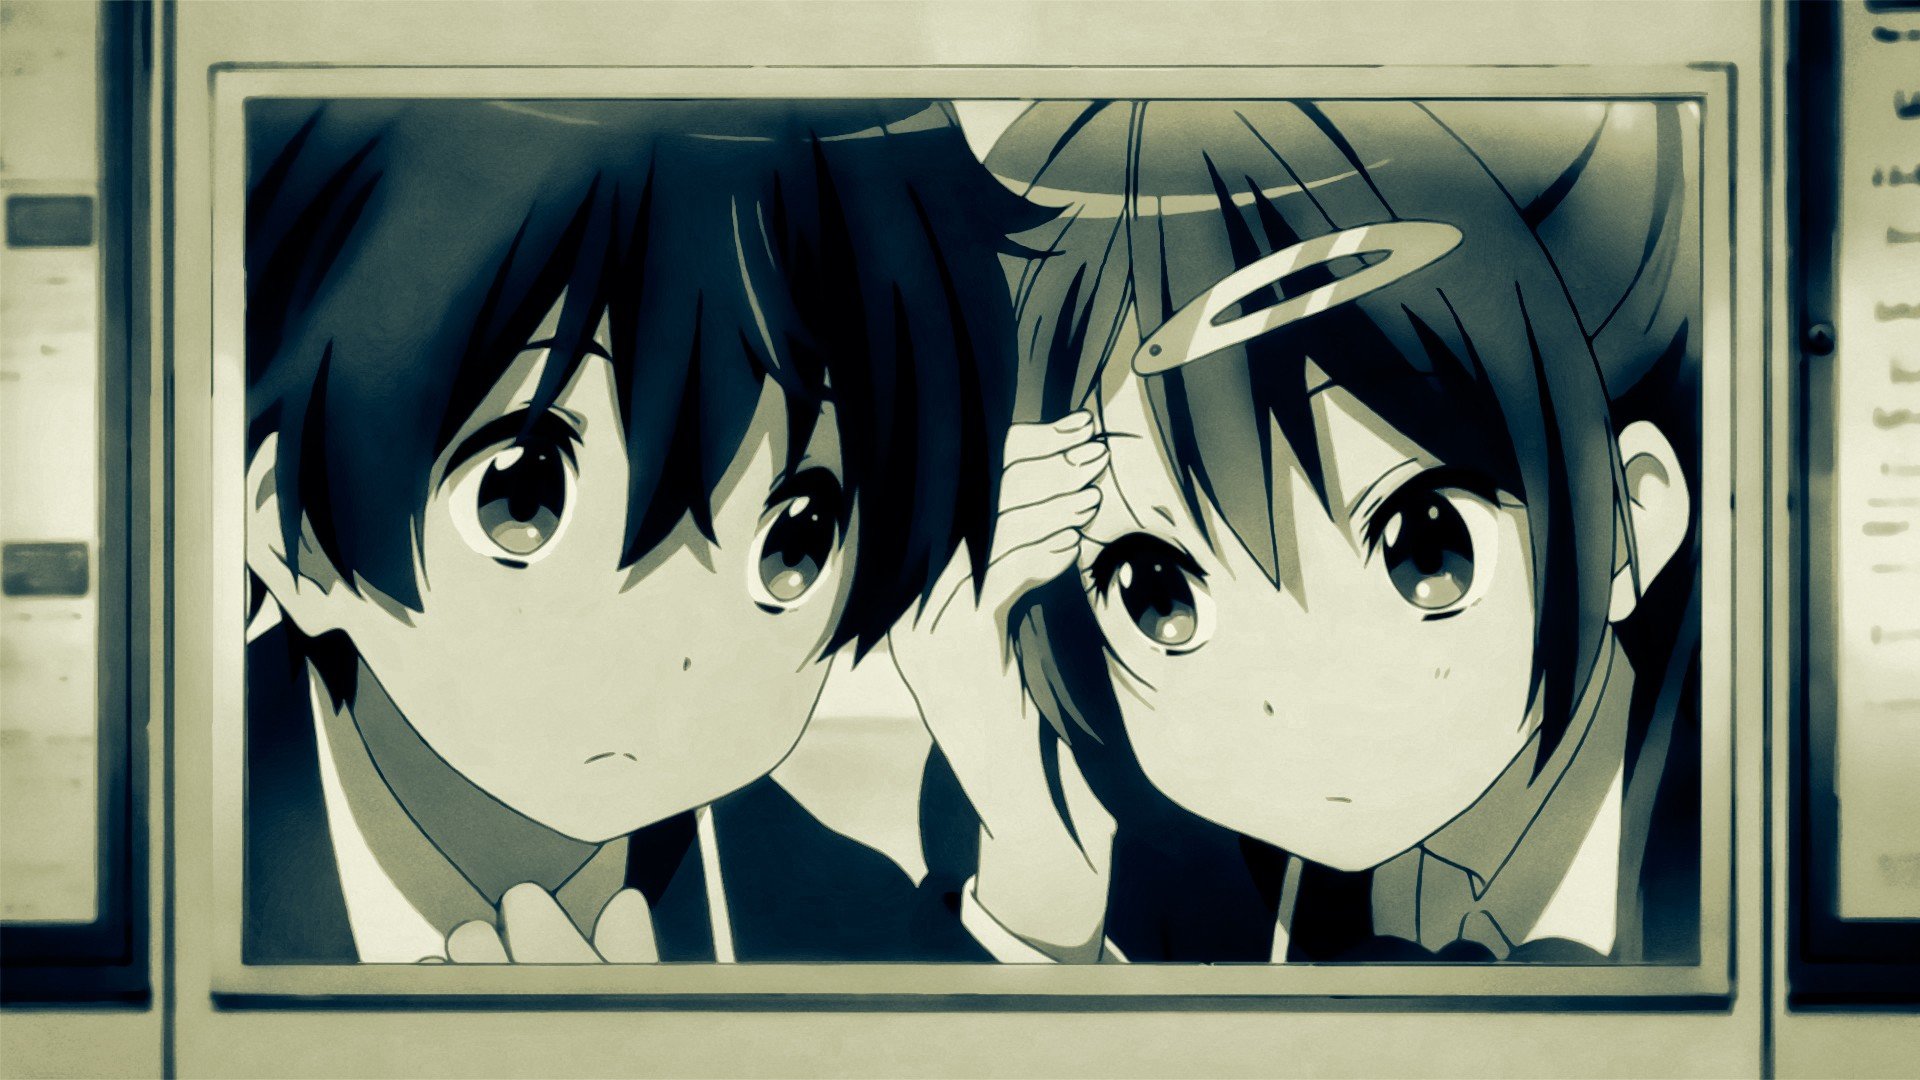 Download full hd 1920x1080 Love, Chunibyo and Other Delusions PC background ID:423327 for free